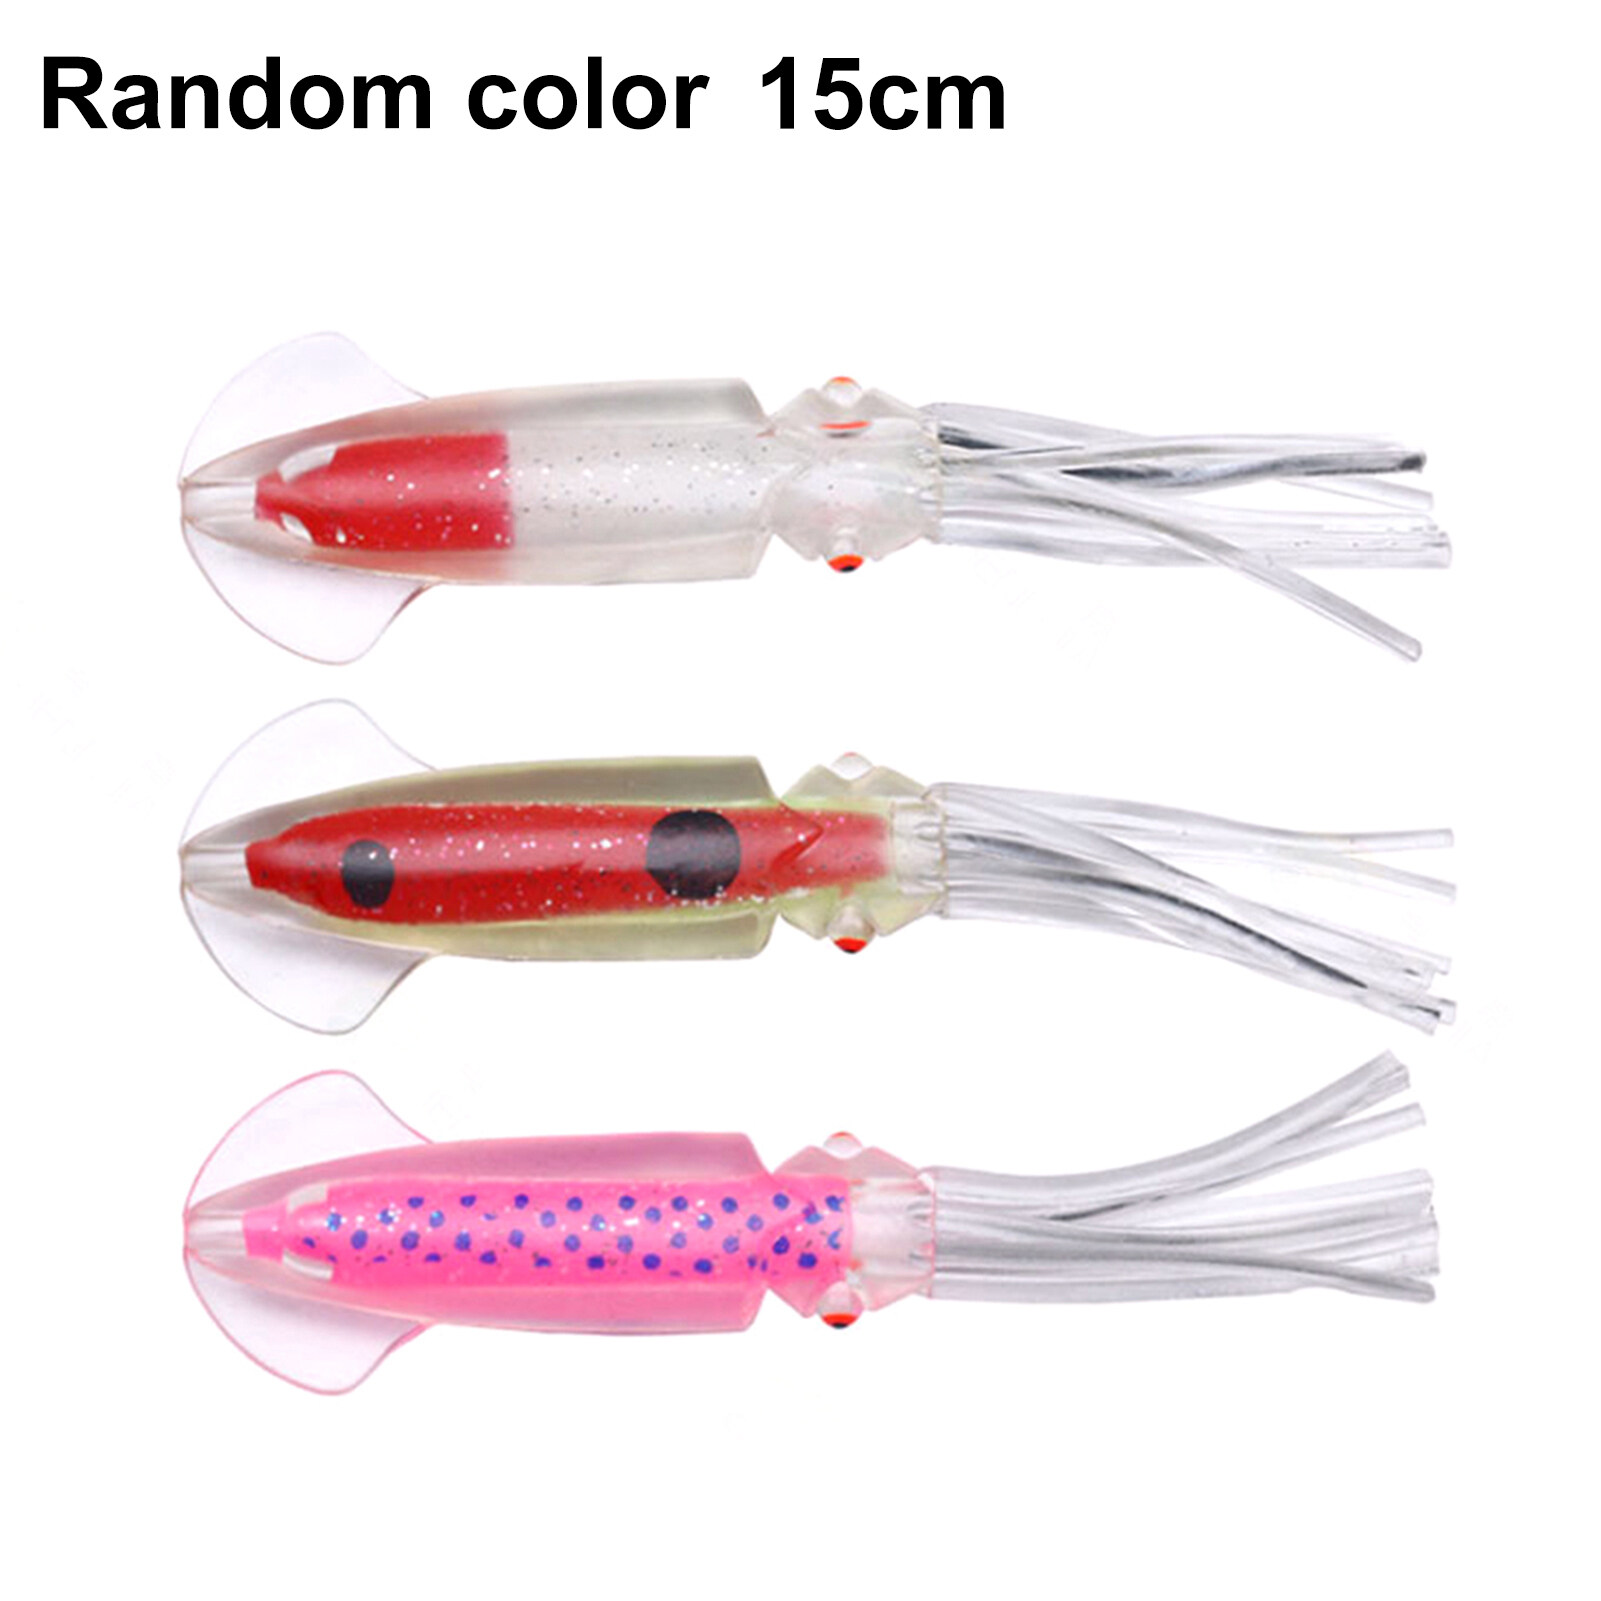 Phad Fishing 30Pcs Random Color Octopus Soft Lure Bait Trolling Squid Skirt for Rigs in Saltwater or Freshwater 